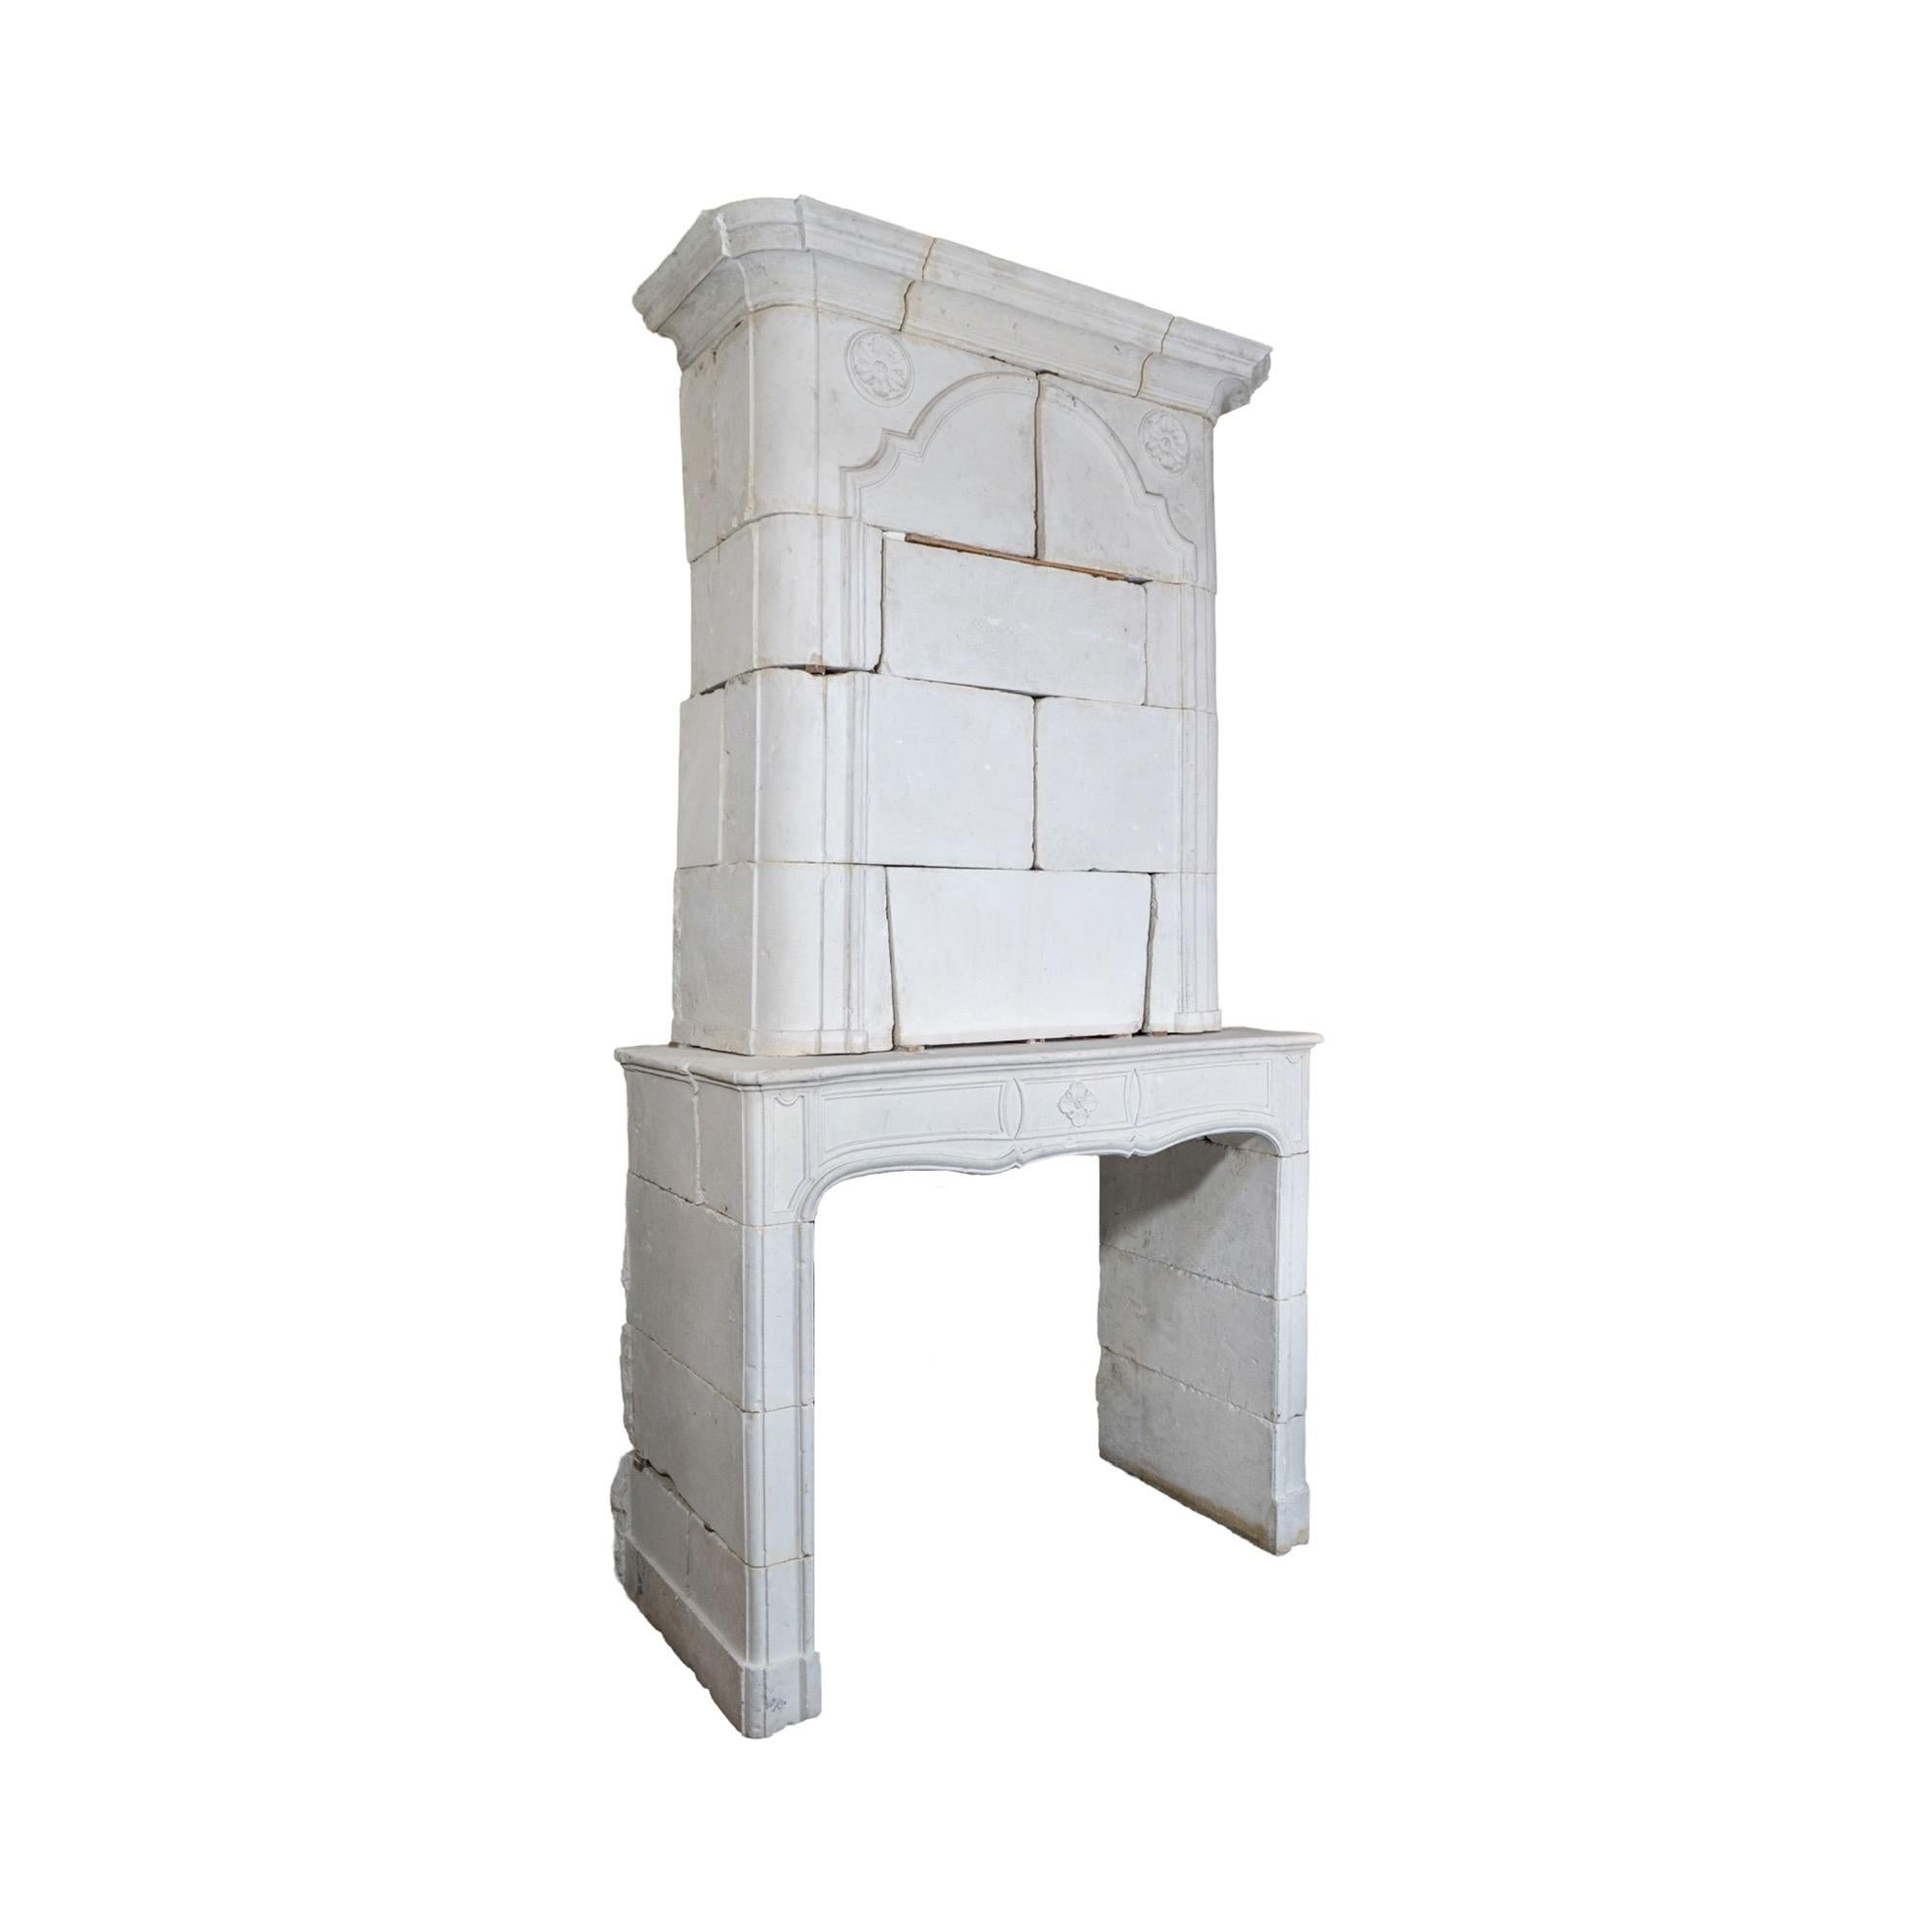 This French Limestone Fireplace is a beautiful 18th century mantel piece from the Louis XV period in France. It features a classic trumeau, making it a perfect and timeless addition to any home.